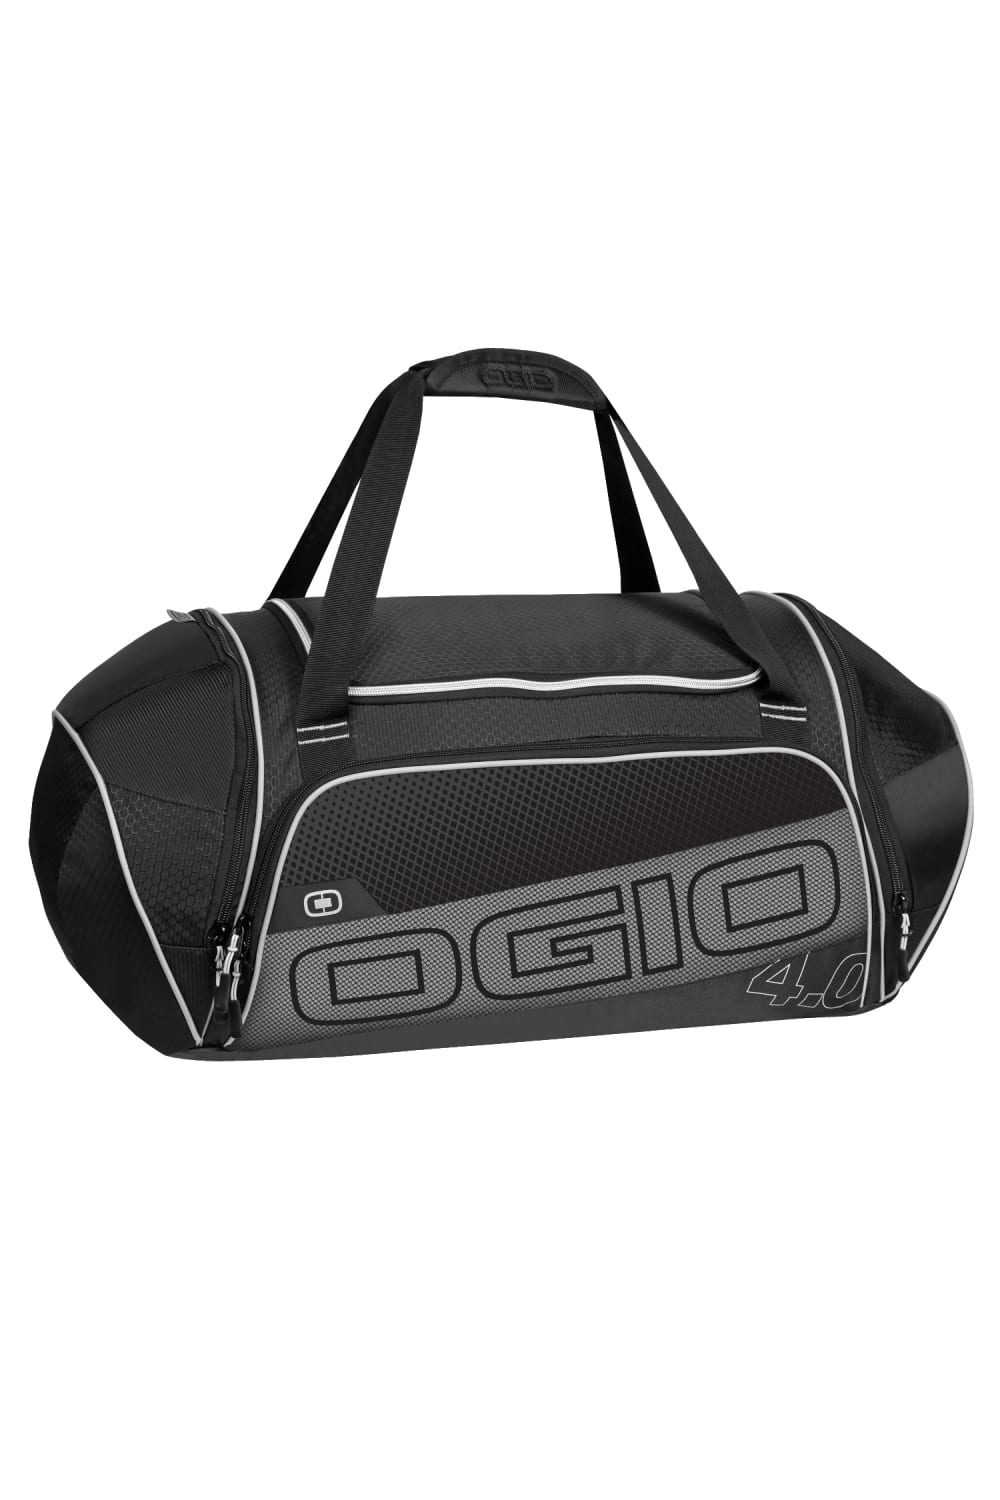 Ogio Endurance Sports 4.0 Duffel Bag (47 Liters) (Pack of 2) (Black/ Silver) (One Size)